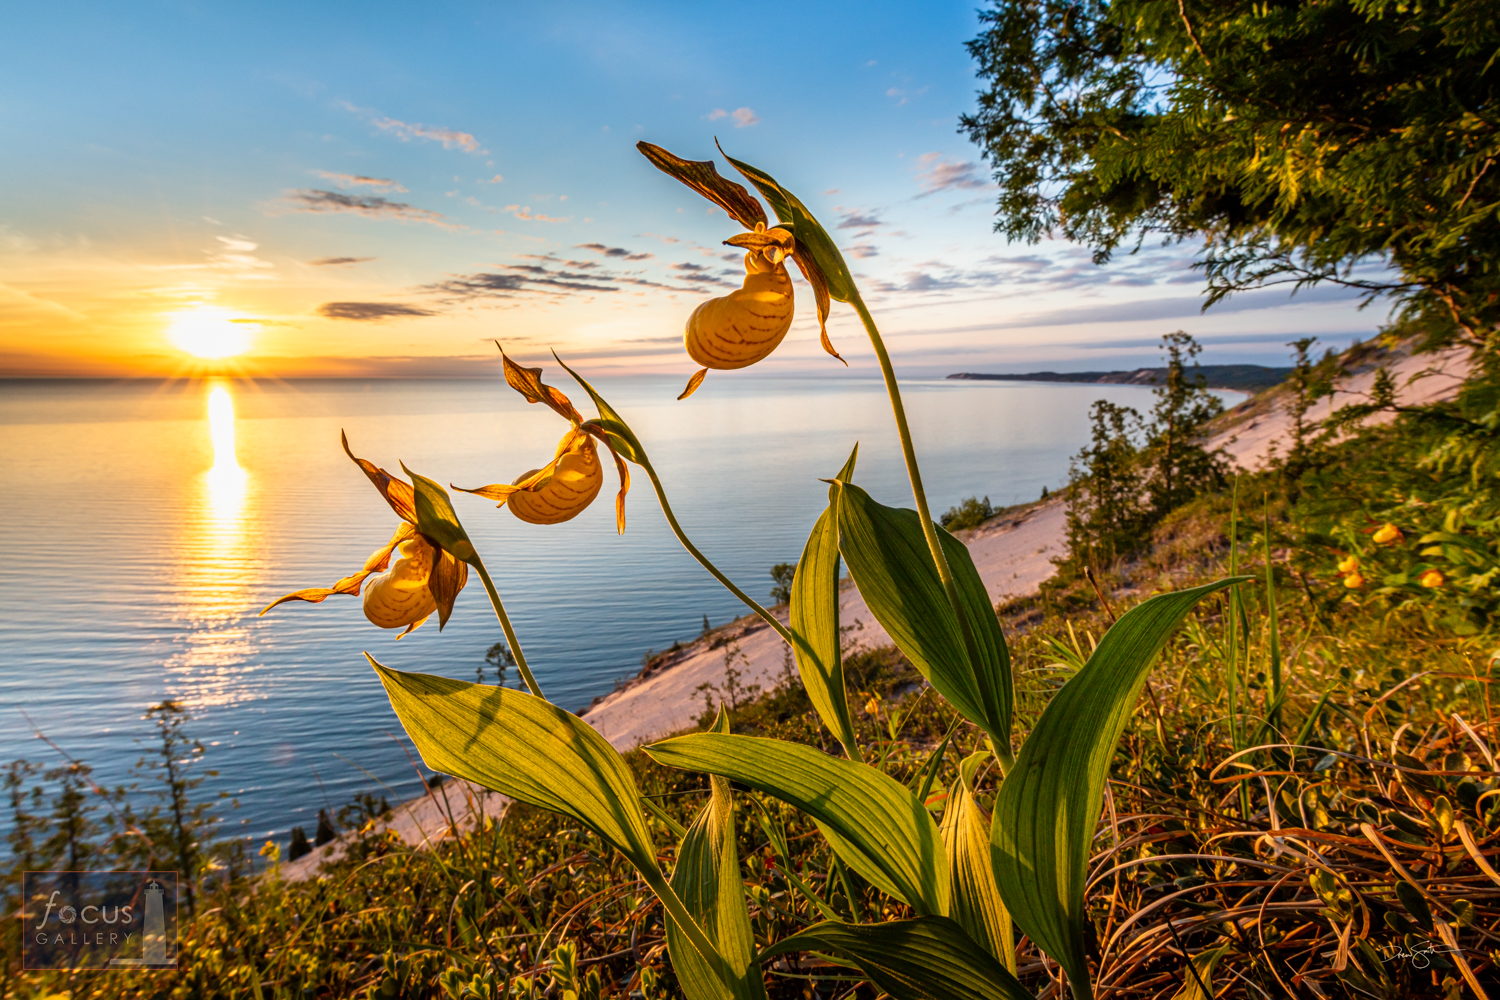 Yellow Lady's Slipper Orchids bloom on Old Baldy as the sun sets over Lake Michigan. This image was taken on land protected by...